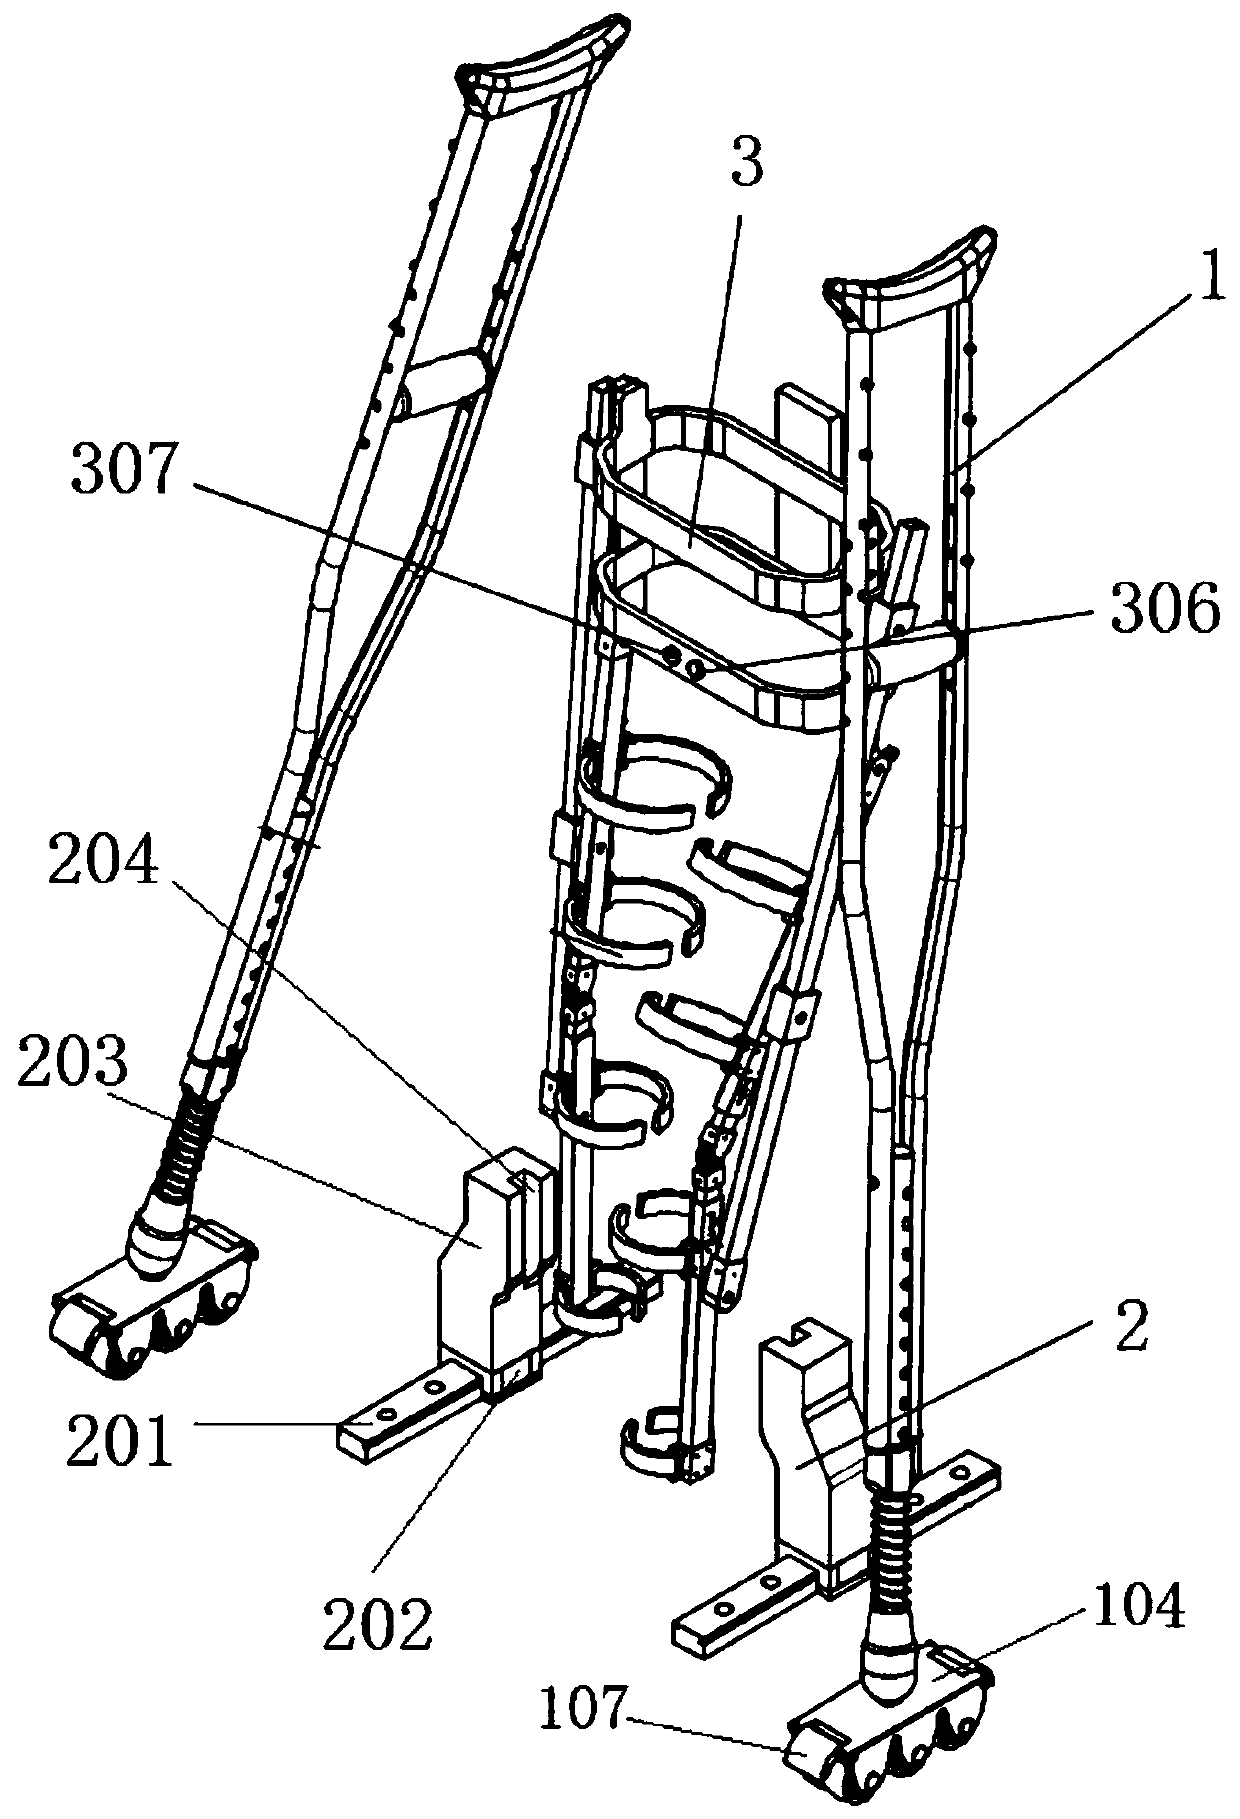 Leg exoskeleton device for assisting old people in moving